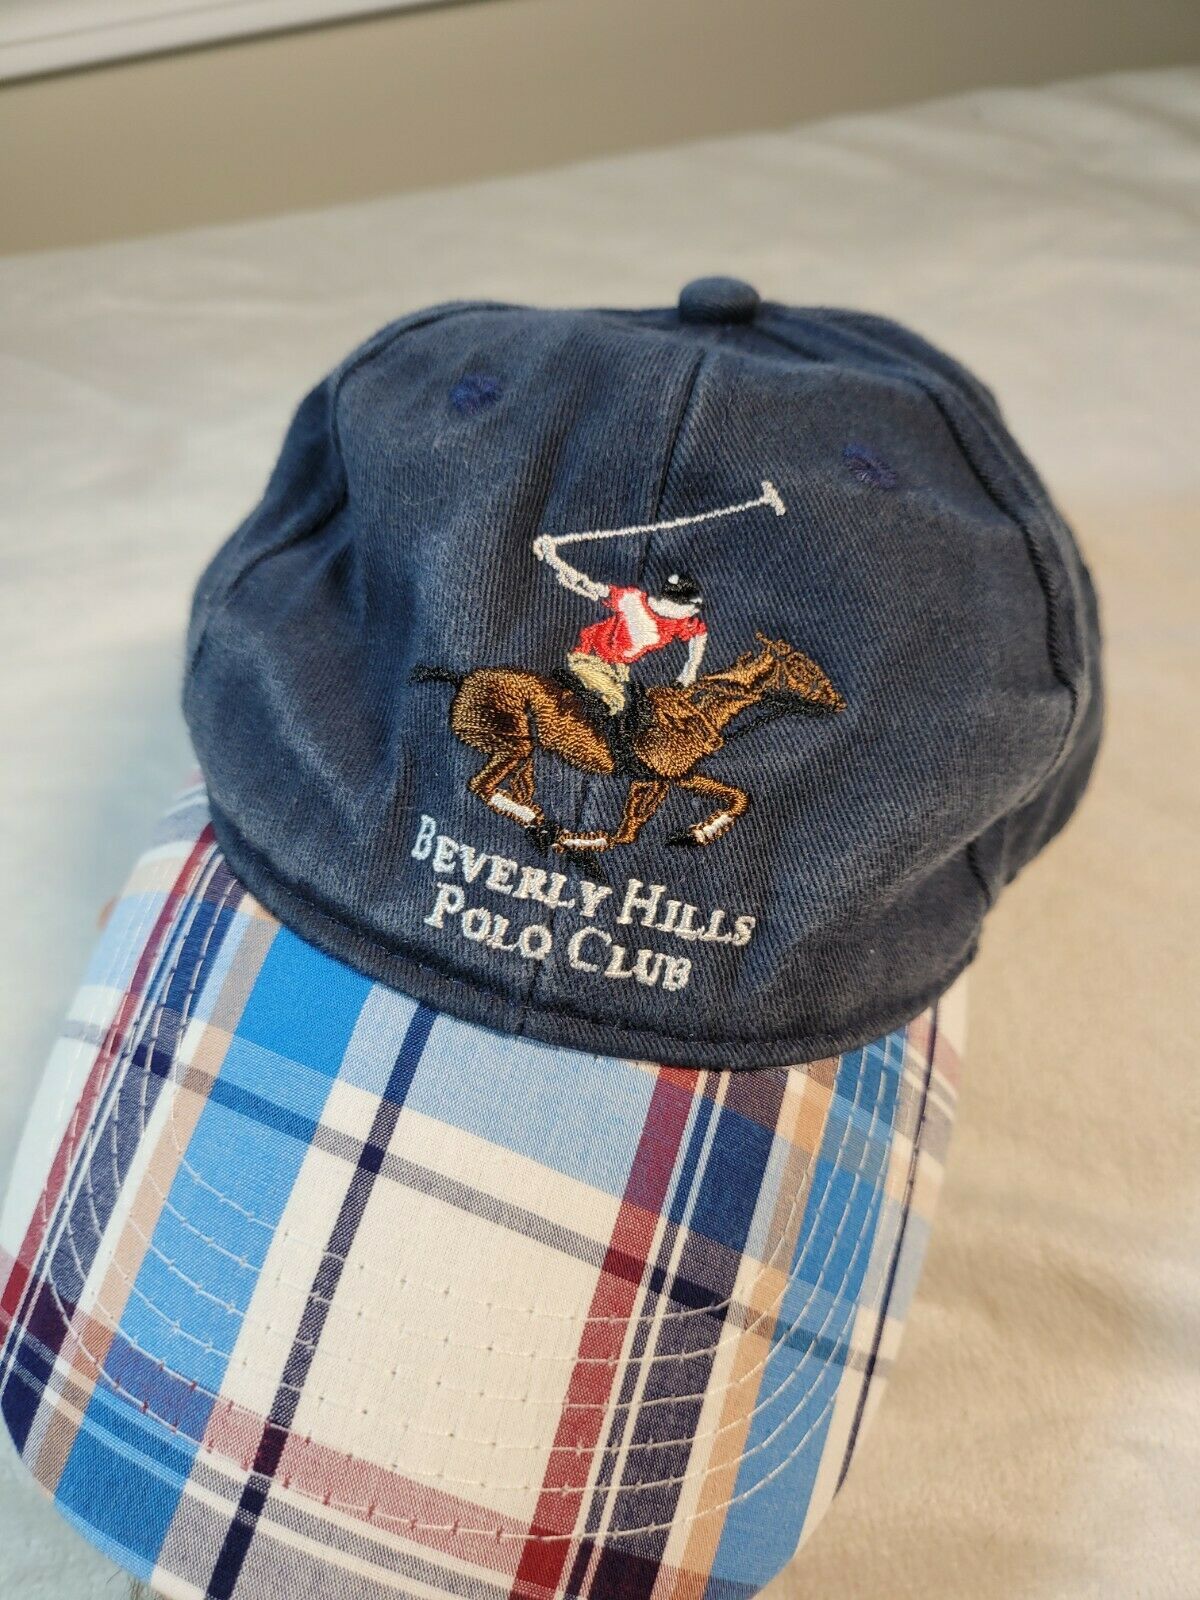 Beverly Hills Polo Club Hat Cap Plaid Bill Adjustable One Size Adult - $8.68